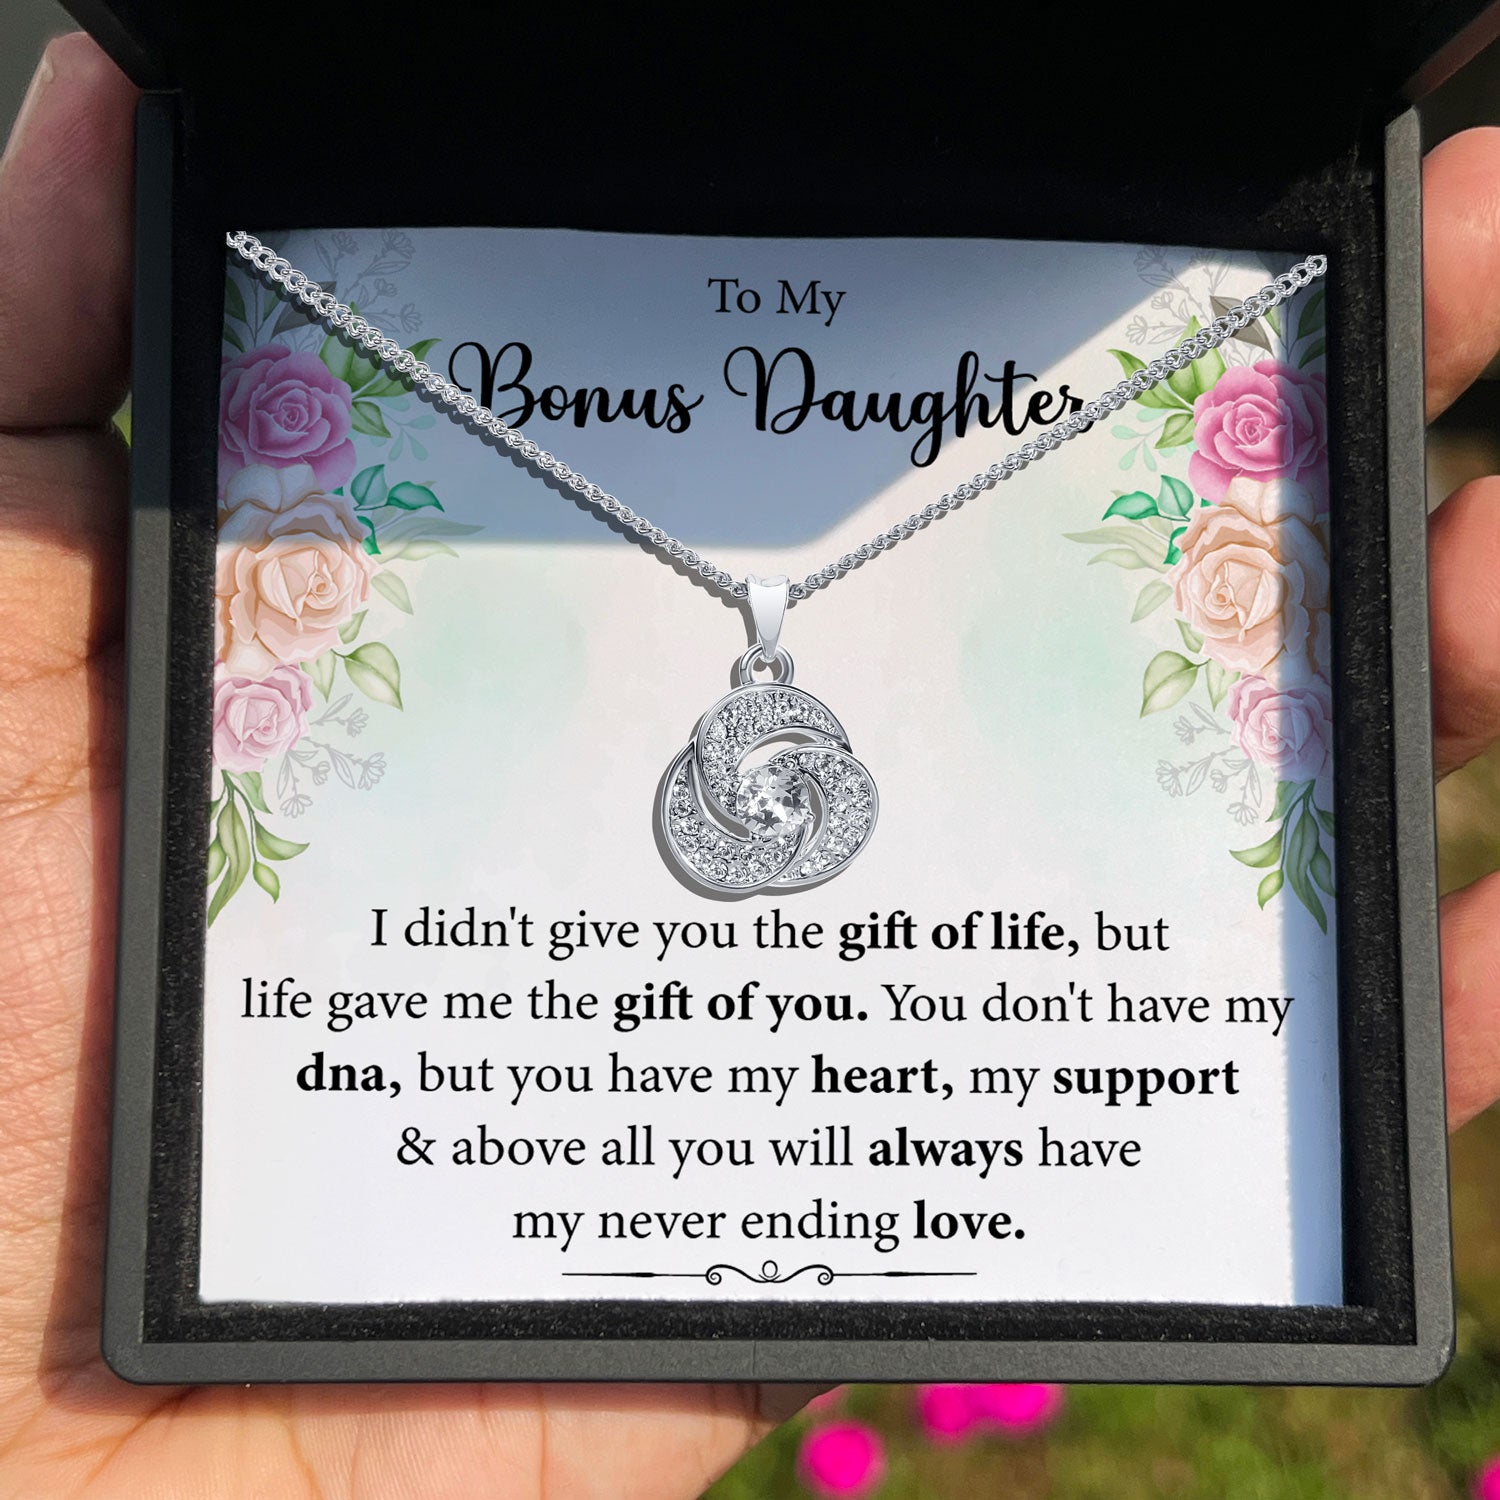 To My Bonus Daughter - You Always Have My Never Ending Love - Tryndi Love Knot Necklace